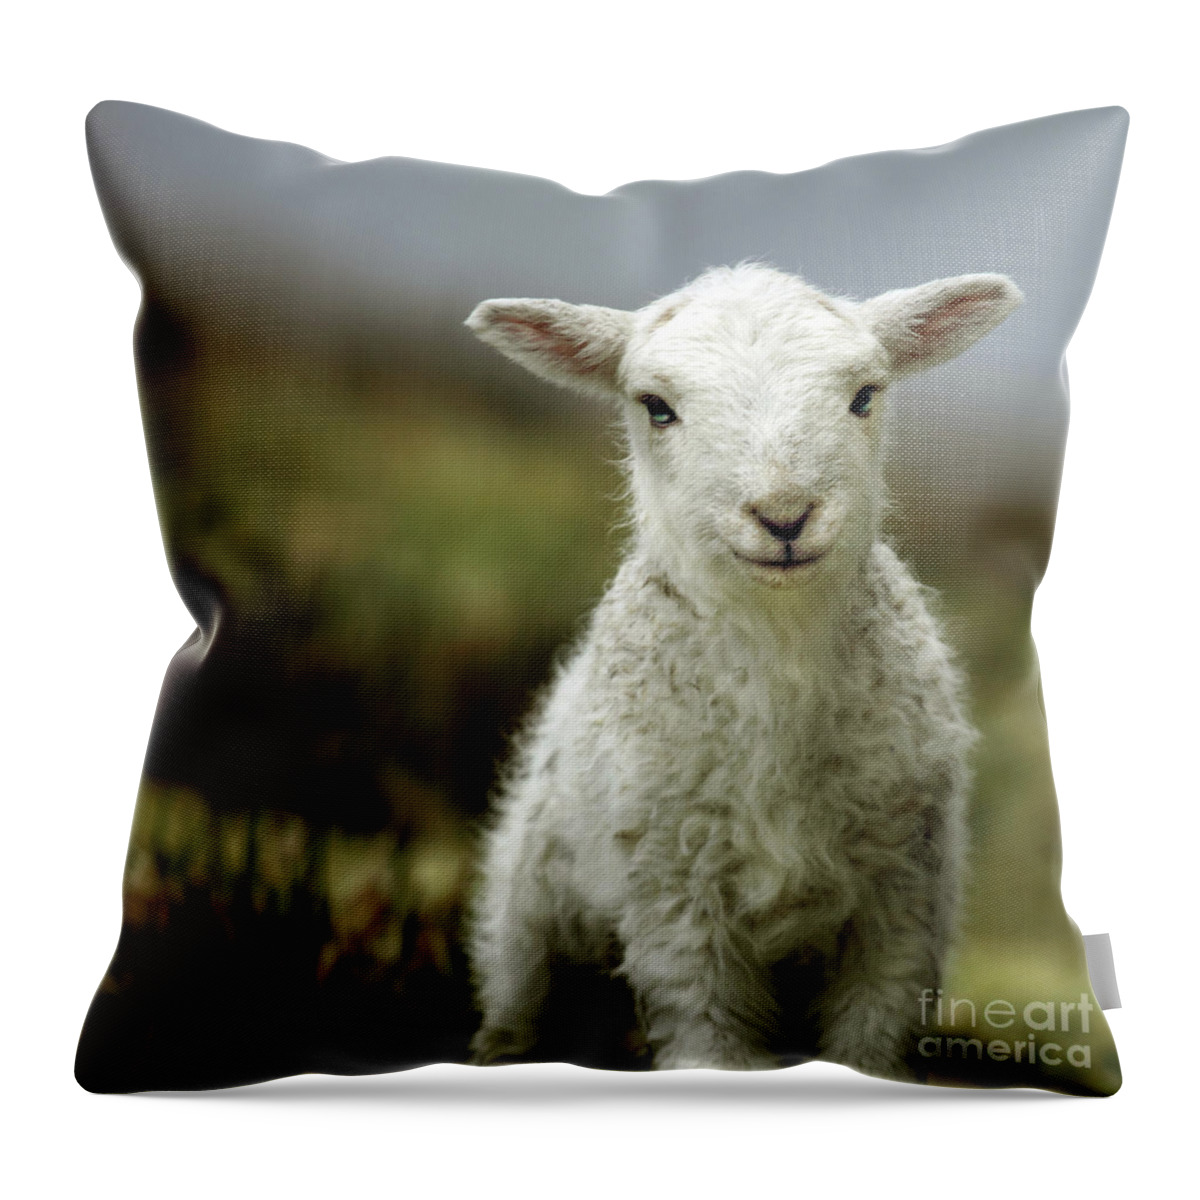 Wales Throw Pillow featuring the photograph The Lamb by Ang El